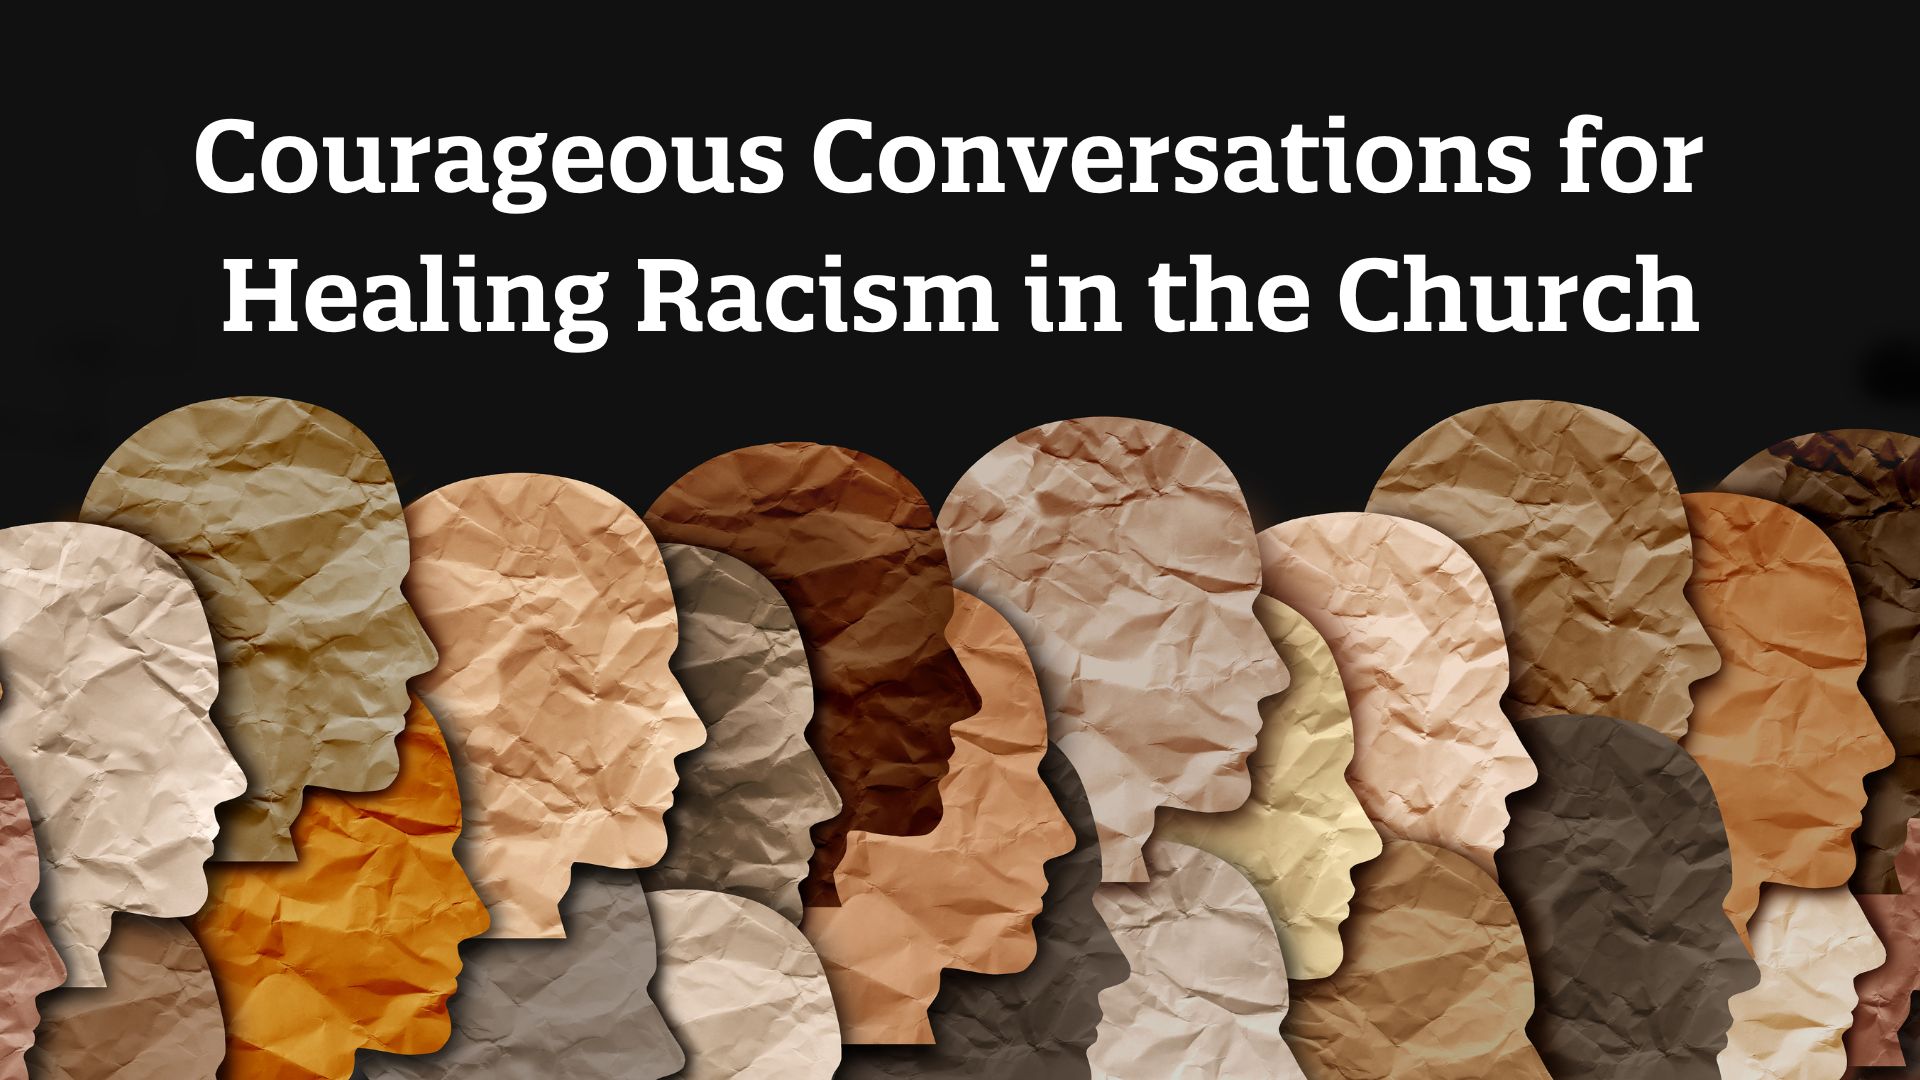 Courageous Conversations for Healing Racism in the Church